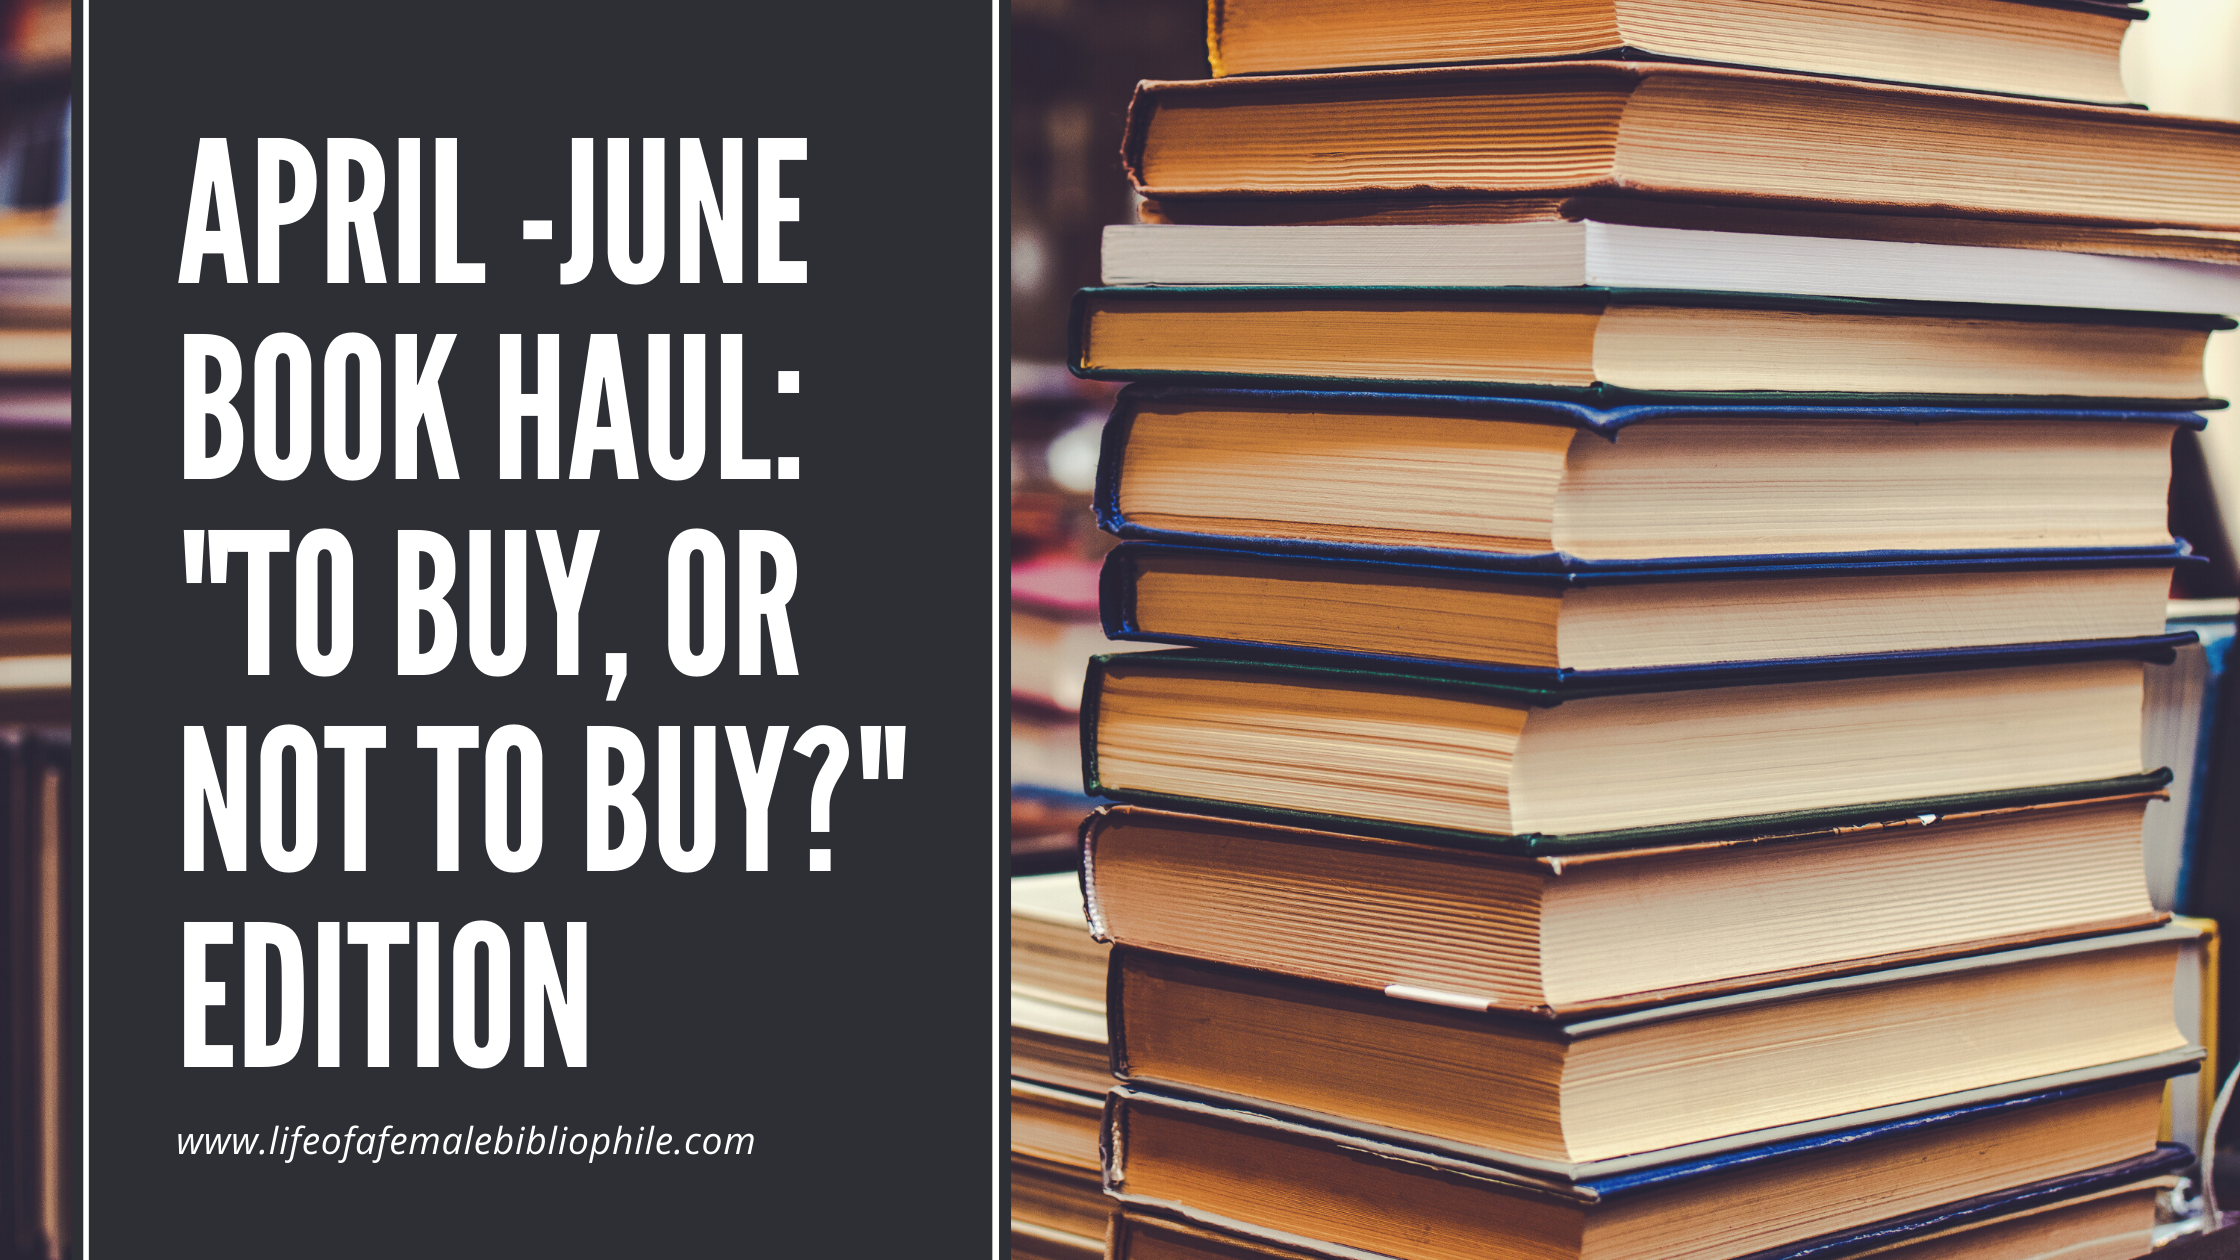 April -June Book Haul: “To Buy, Or Not to Buy?” Edition